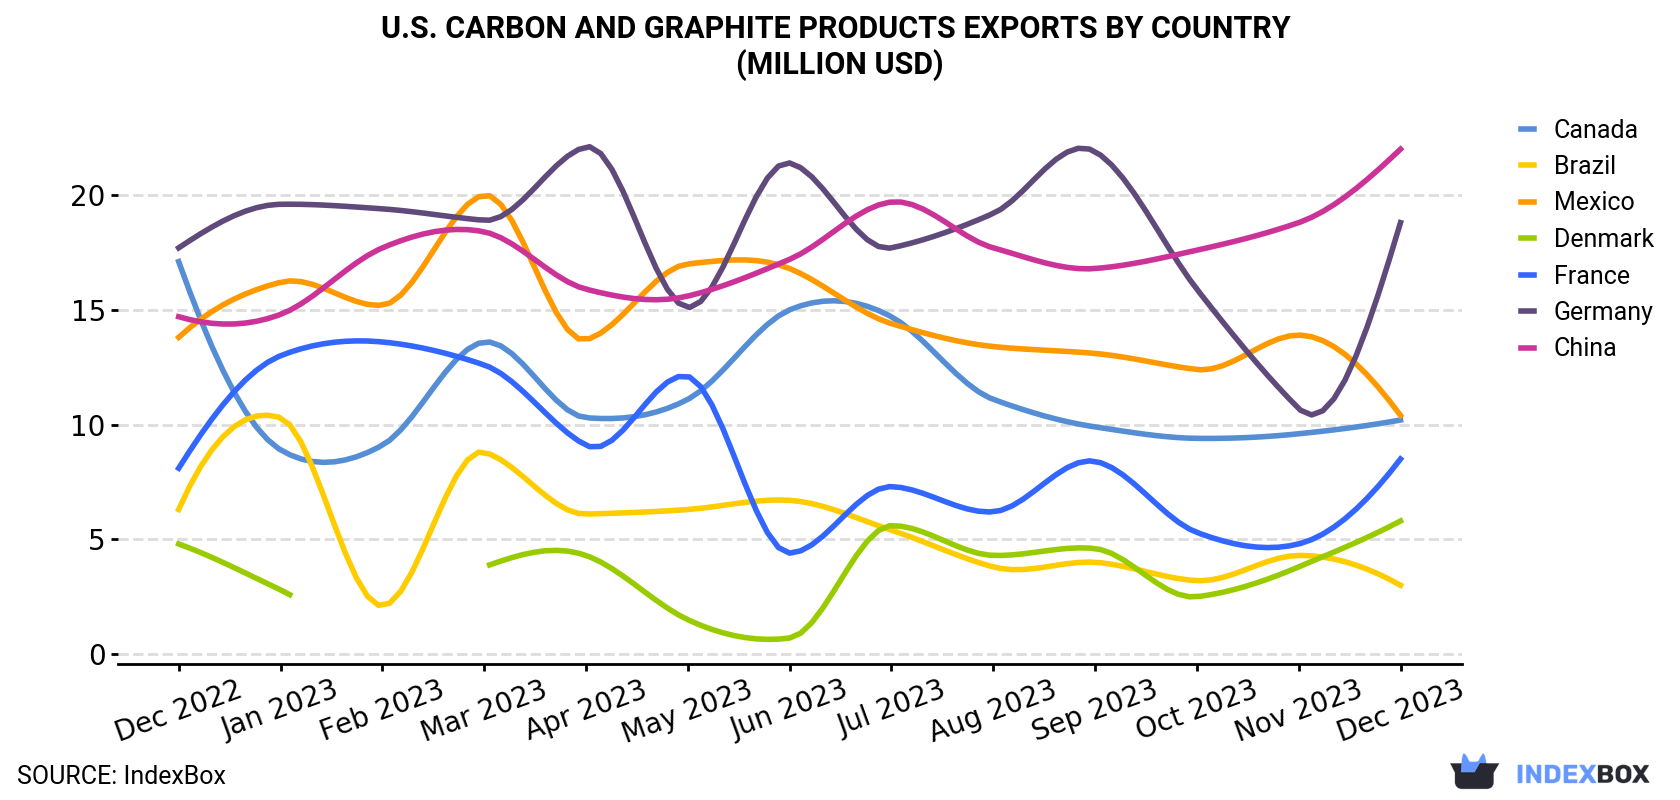 U.S. Carbon And Graphite Products Exports By Country (Million USD)